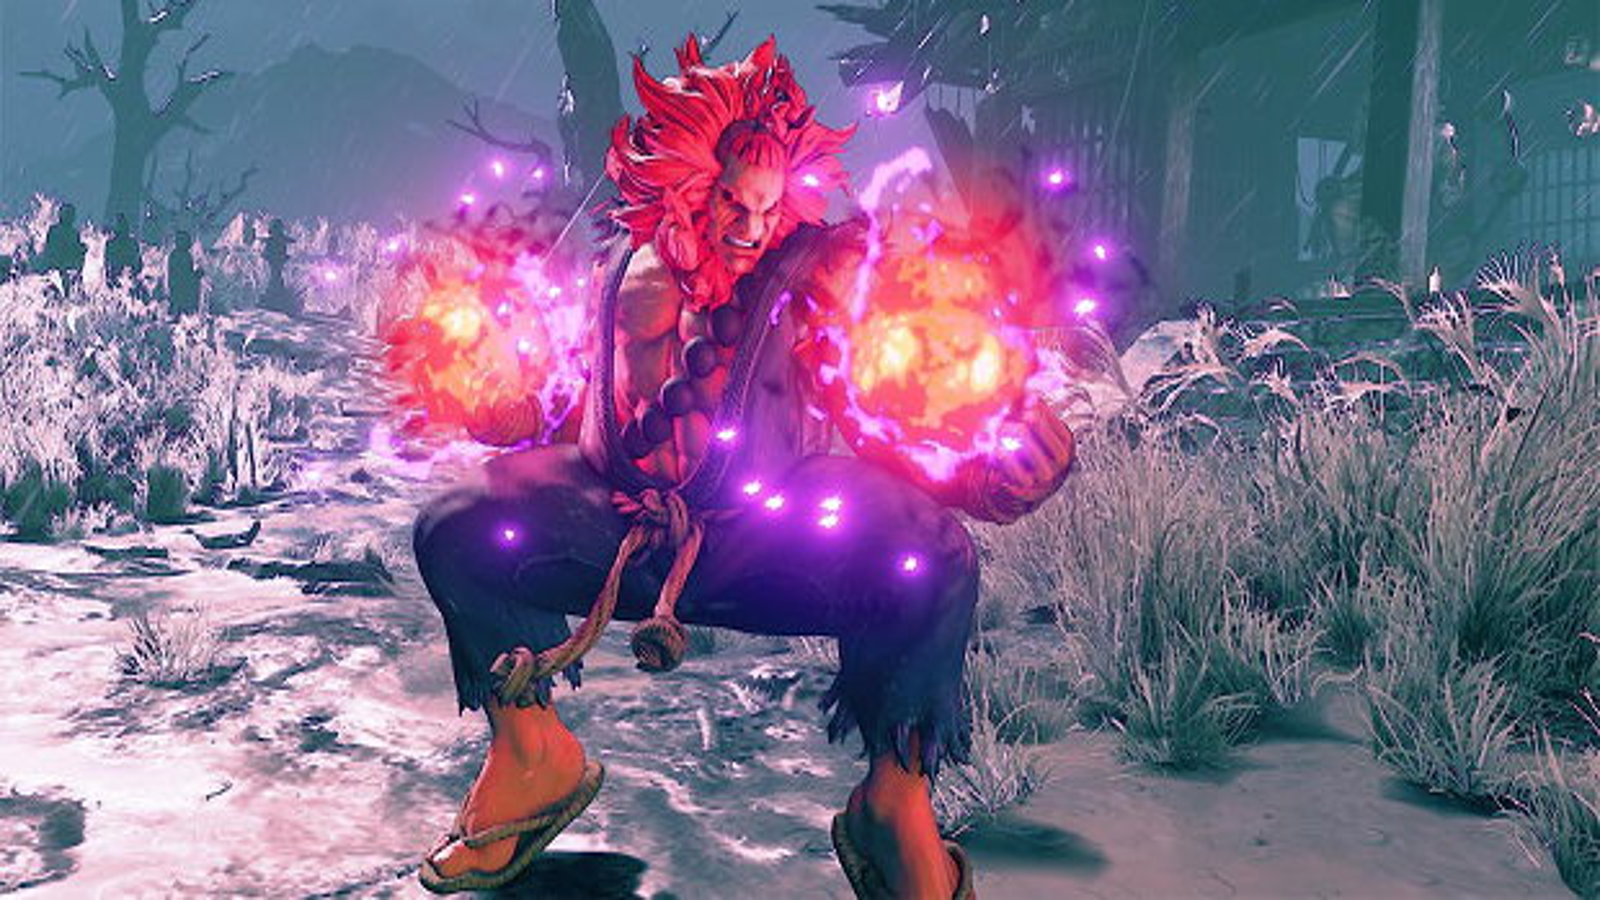 Major nerf to Akuma spotted in Street Fighter 5: Champion Edition